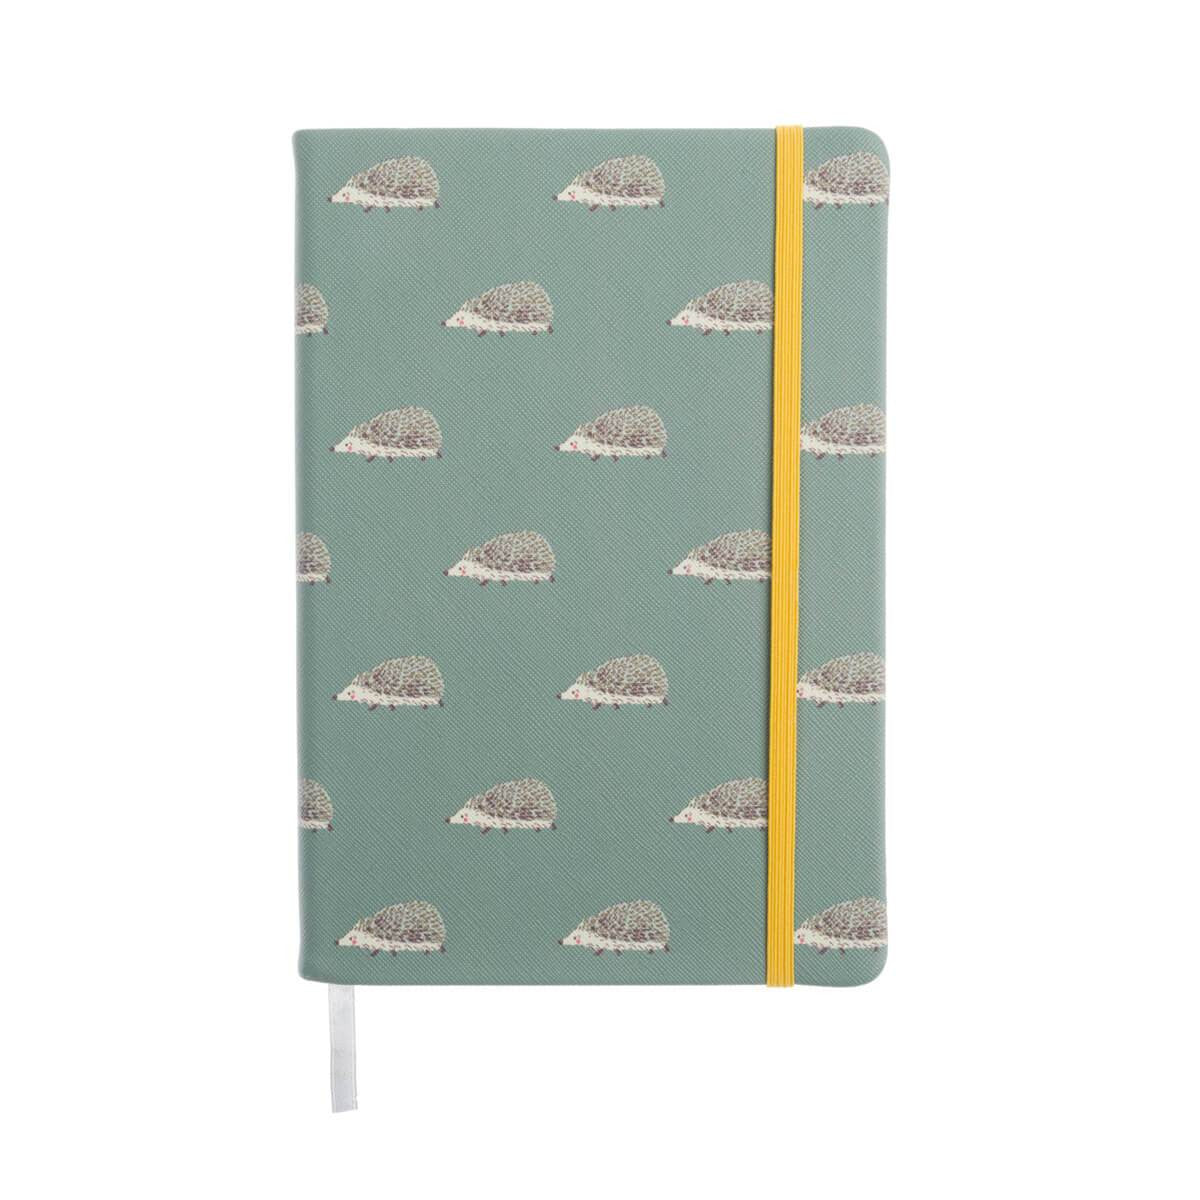 National Trust Hedgehog A5 Fabric Notebook by Sophie Allport